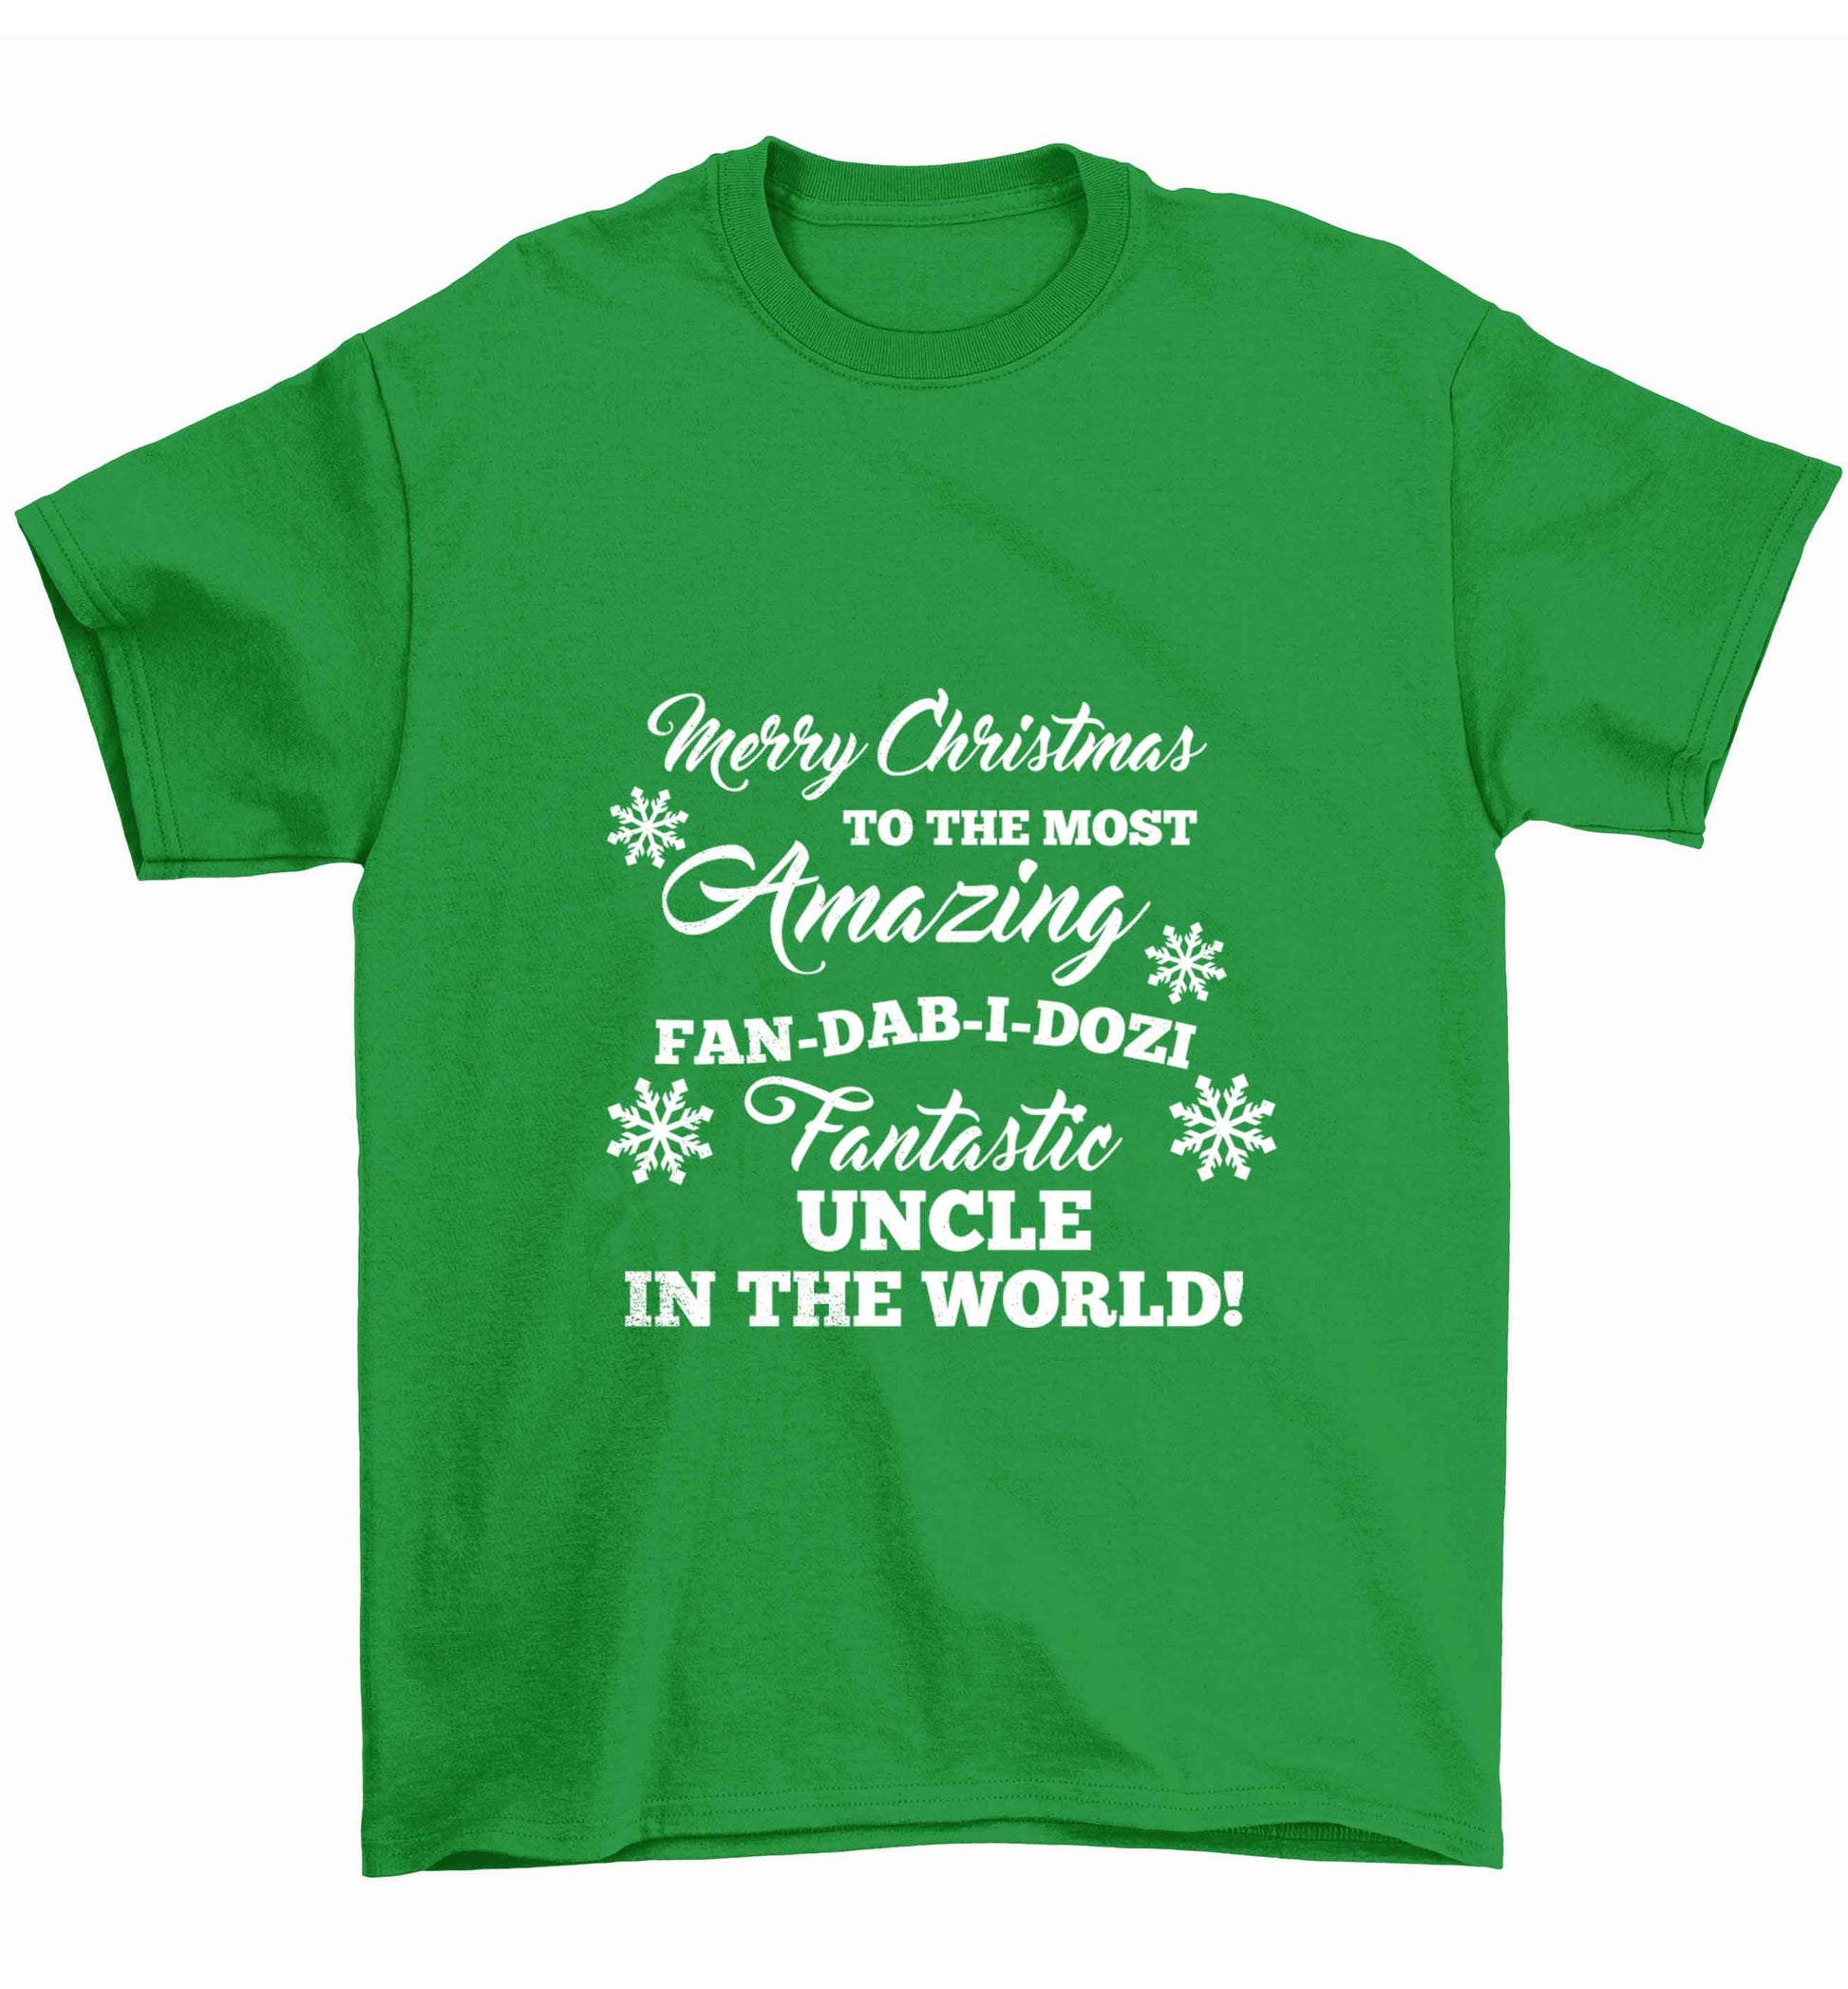 Merry Christmas to the most amazing fan-dab-i-dozi fantasic Uncle in the world Children's green Tshirt 12-13 Years